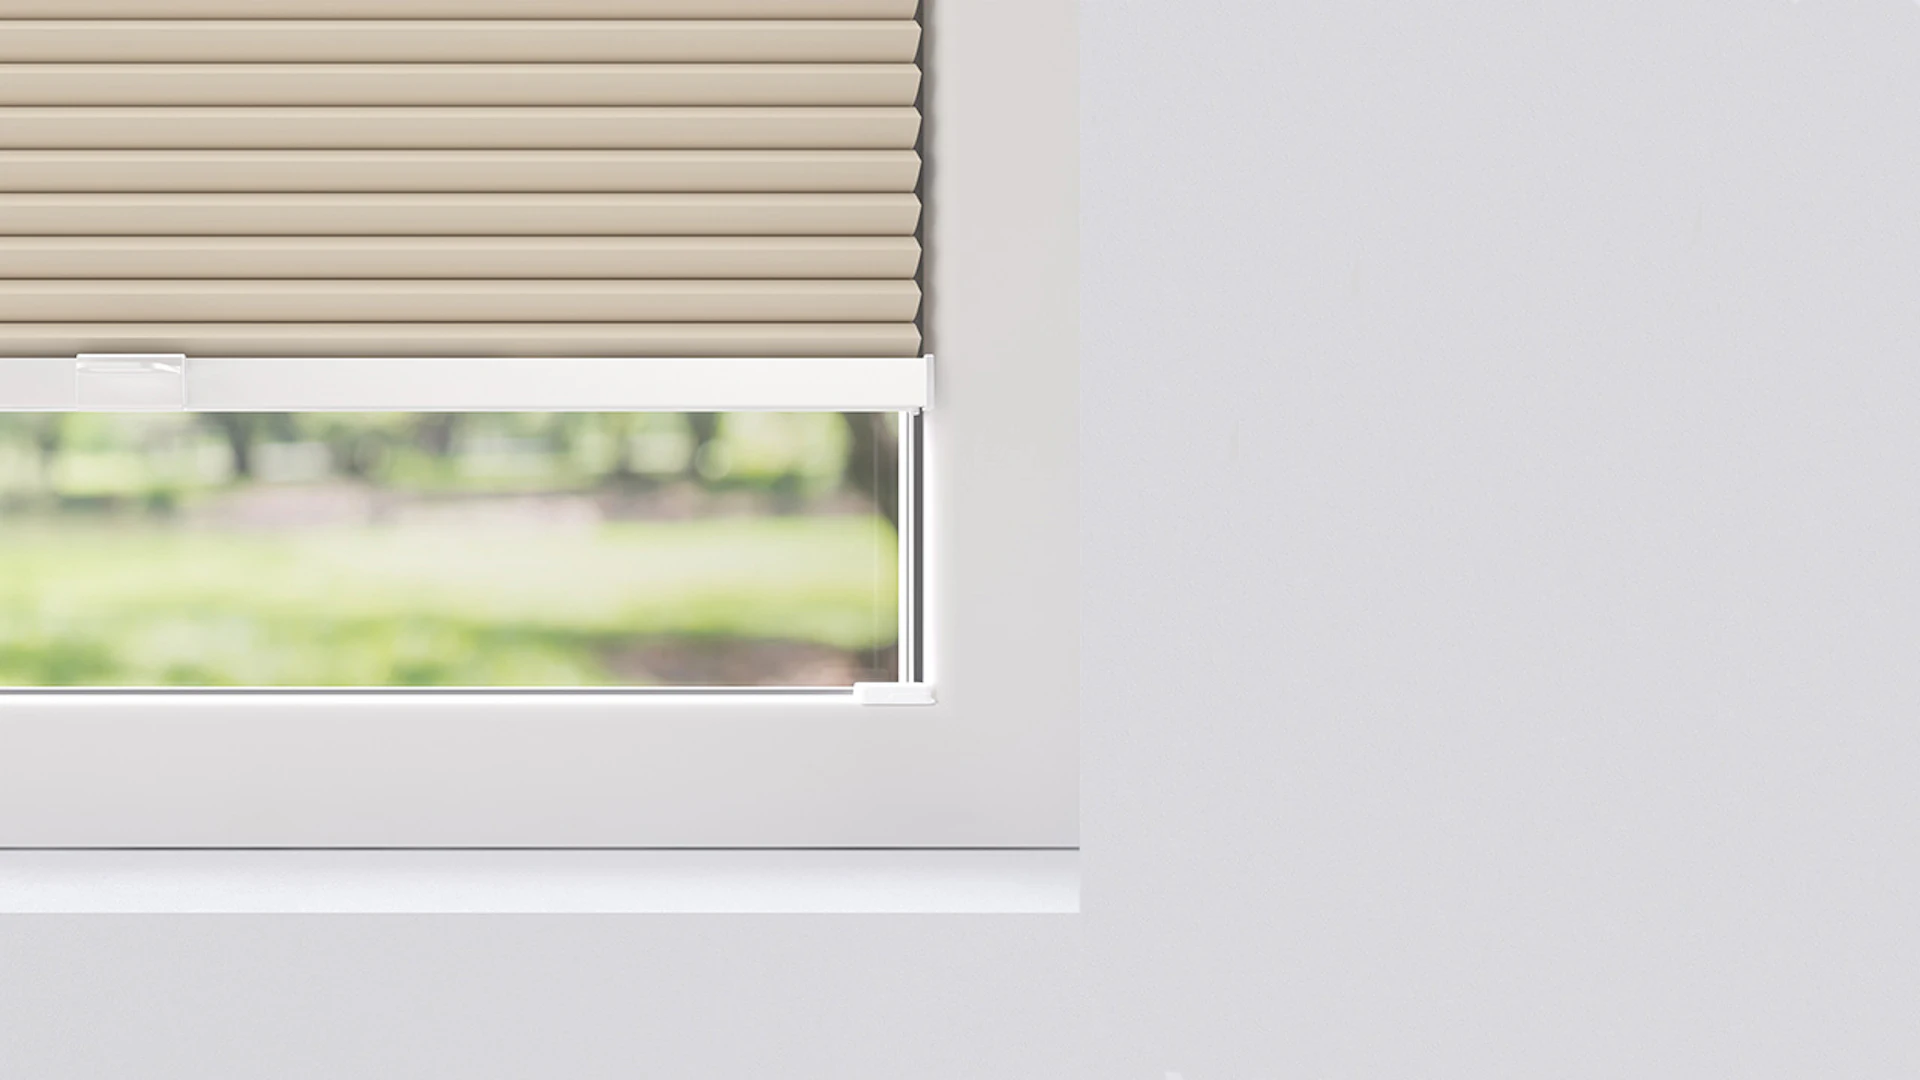 planeo honeycomb pleated blind 25mm VD VS - sand